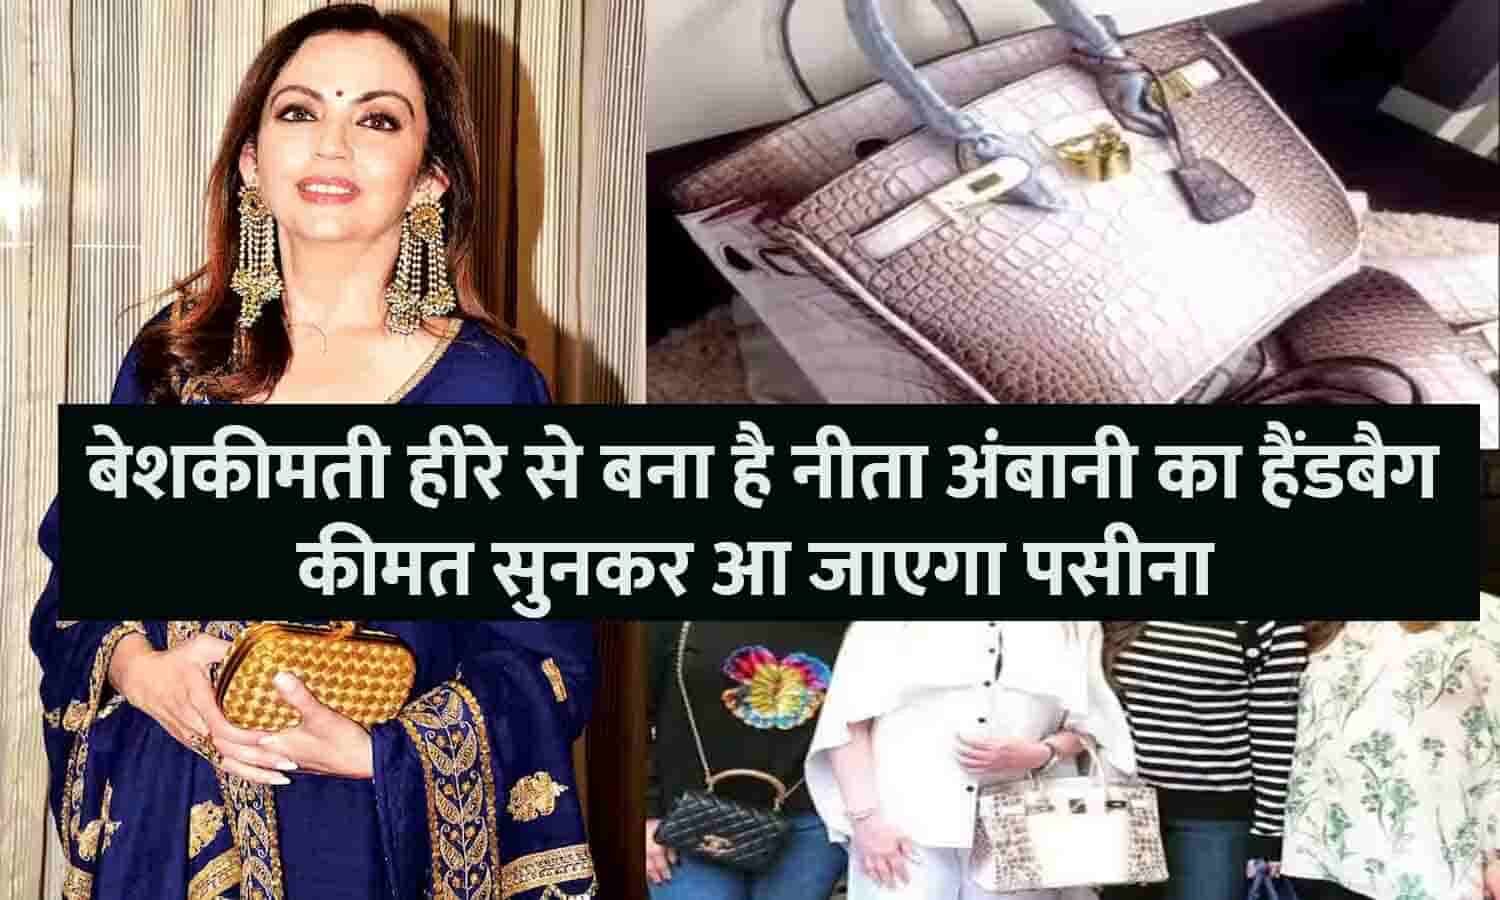 BollywoodShaadis.com - Radhika Merchant carried a silver-coloured Hermes  Kellymorphose bag worth Rs. 52 lakhs as she appeared for the launch of Nita  Mukesh Ambani Cultural Centre. ❤️ #bollywoodshaadis #radhikamerchant  #anantambani #nmacc #kellymorphose |